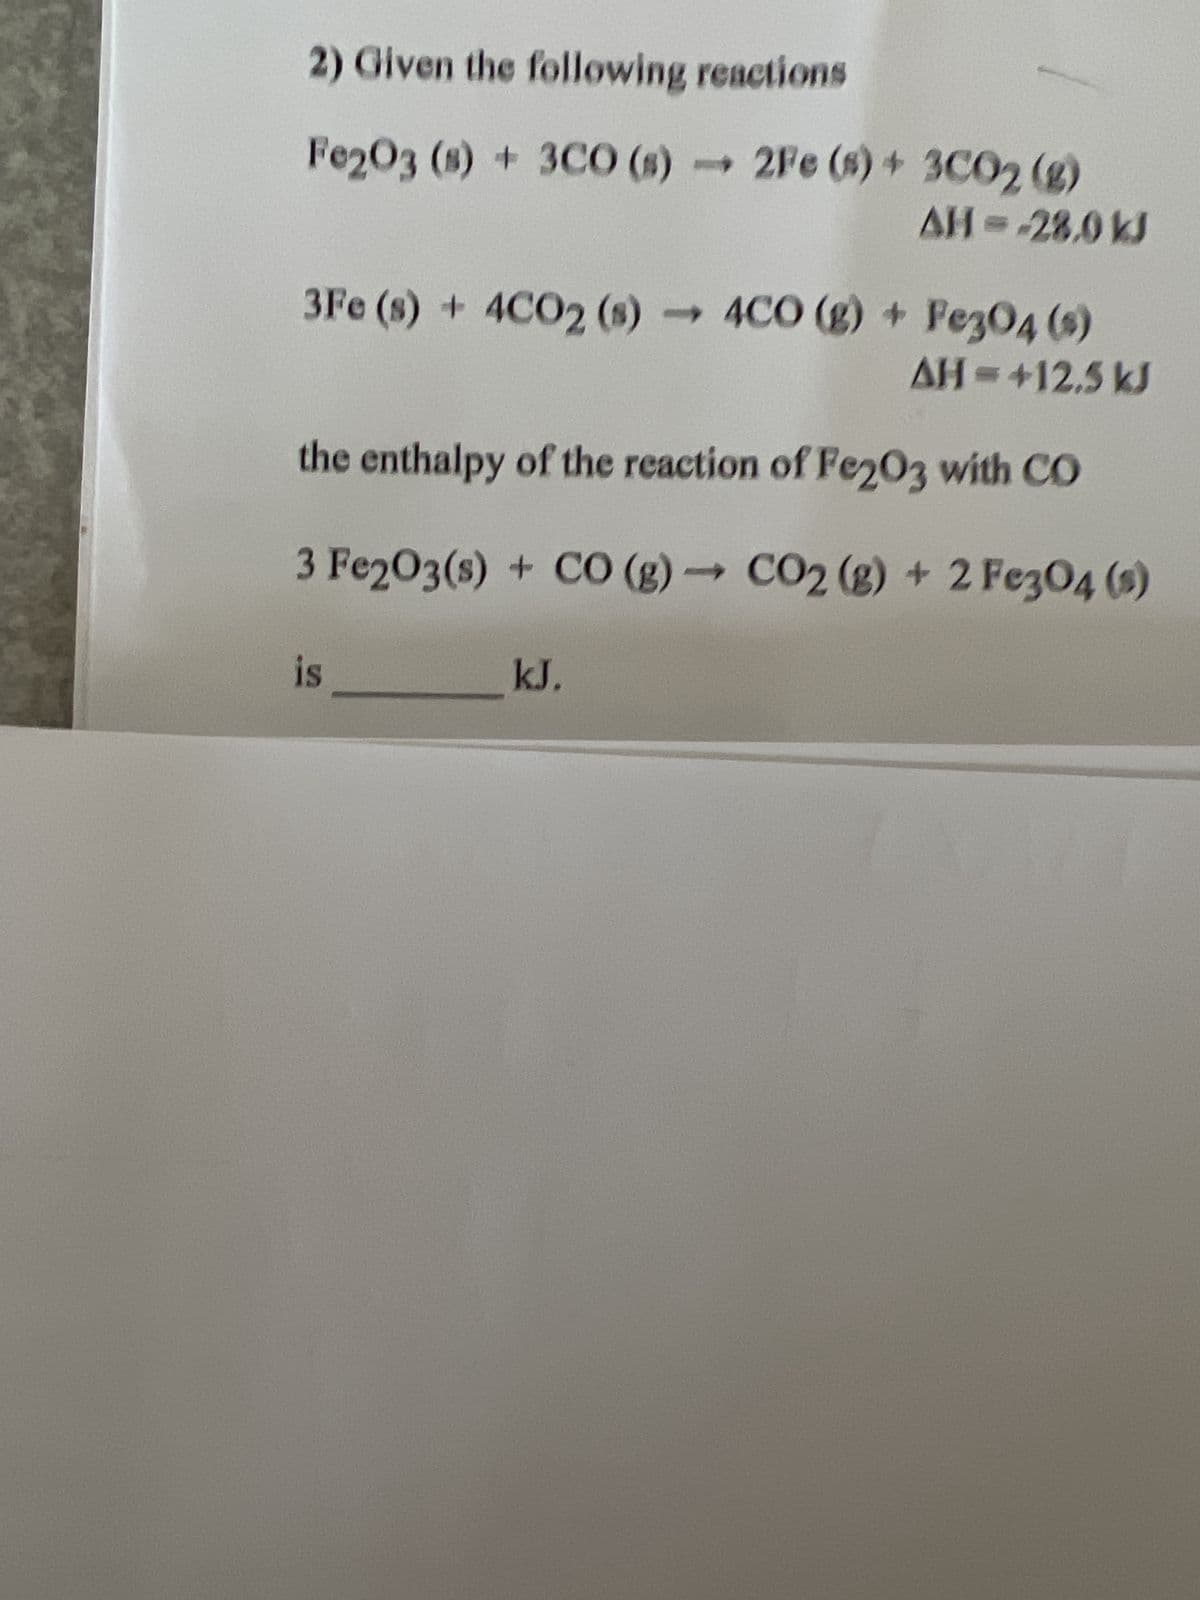 2) Given the following reactions
Fe2O3 (s) + 3CO (s)- 2Fe (s) + 3CO2 (g)
AH = -28,0 kJ
>
3Fe (s) + 4CO2 (s) 4CO (g) + Fe3O4 (s)
AH=+12.5 kJ
the enthalpy of the reaction of Fe203 with CO
3 Fe2O3(s) + CO (g) → CO2 (g) + 2 Fe3O4 (s)
is
kJ.